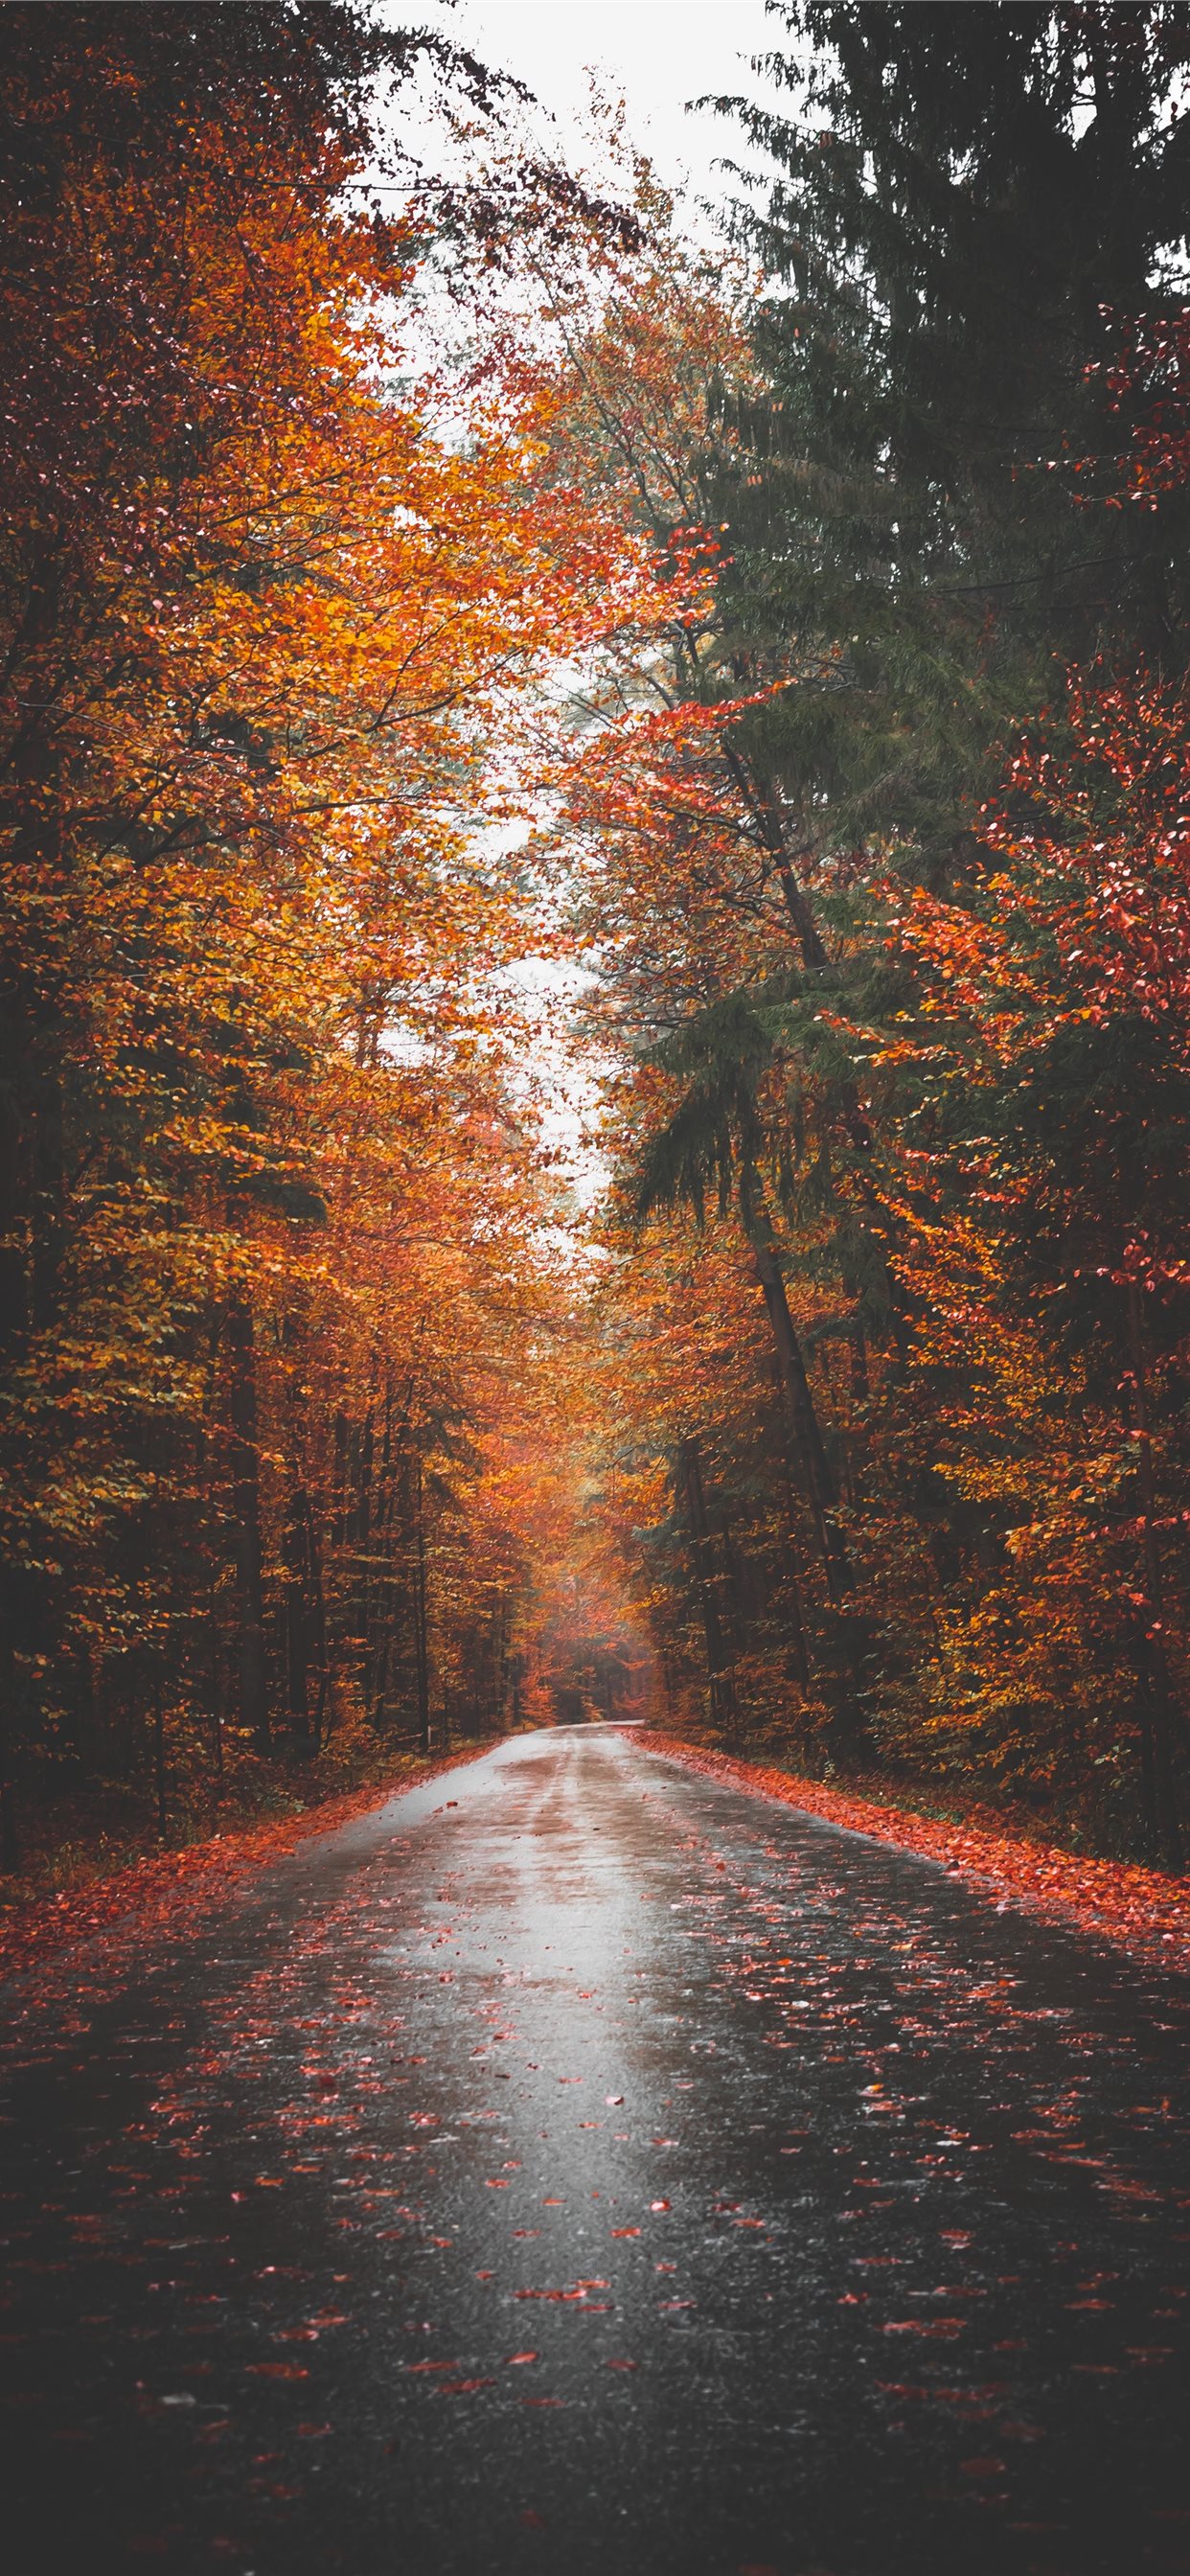 empty road surrounded by tree lines iPhone X Wallpapers Free Download